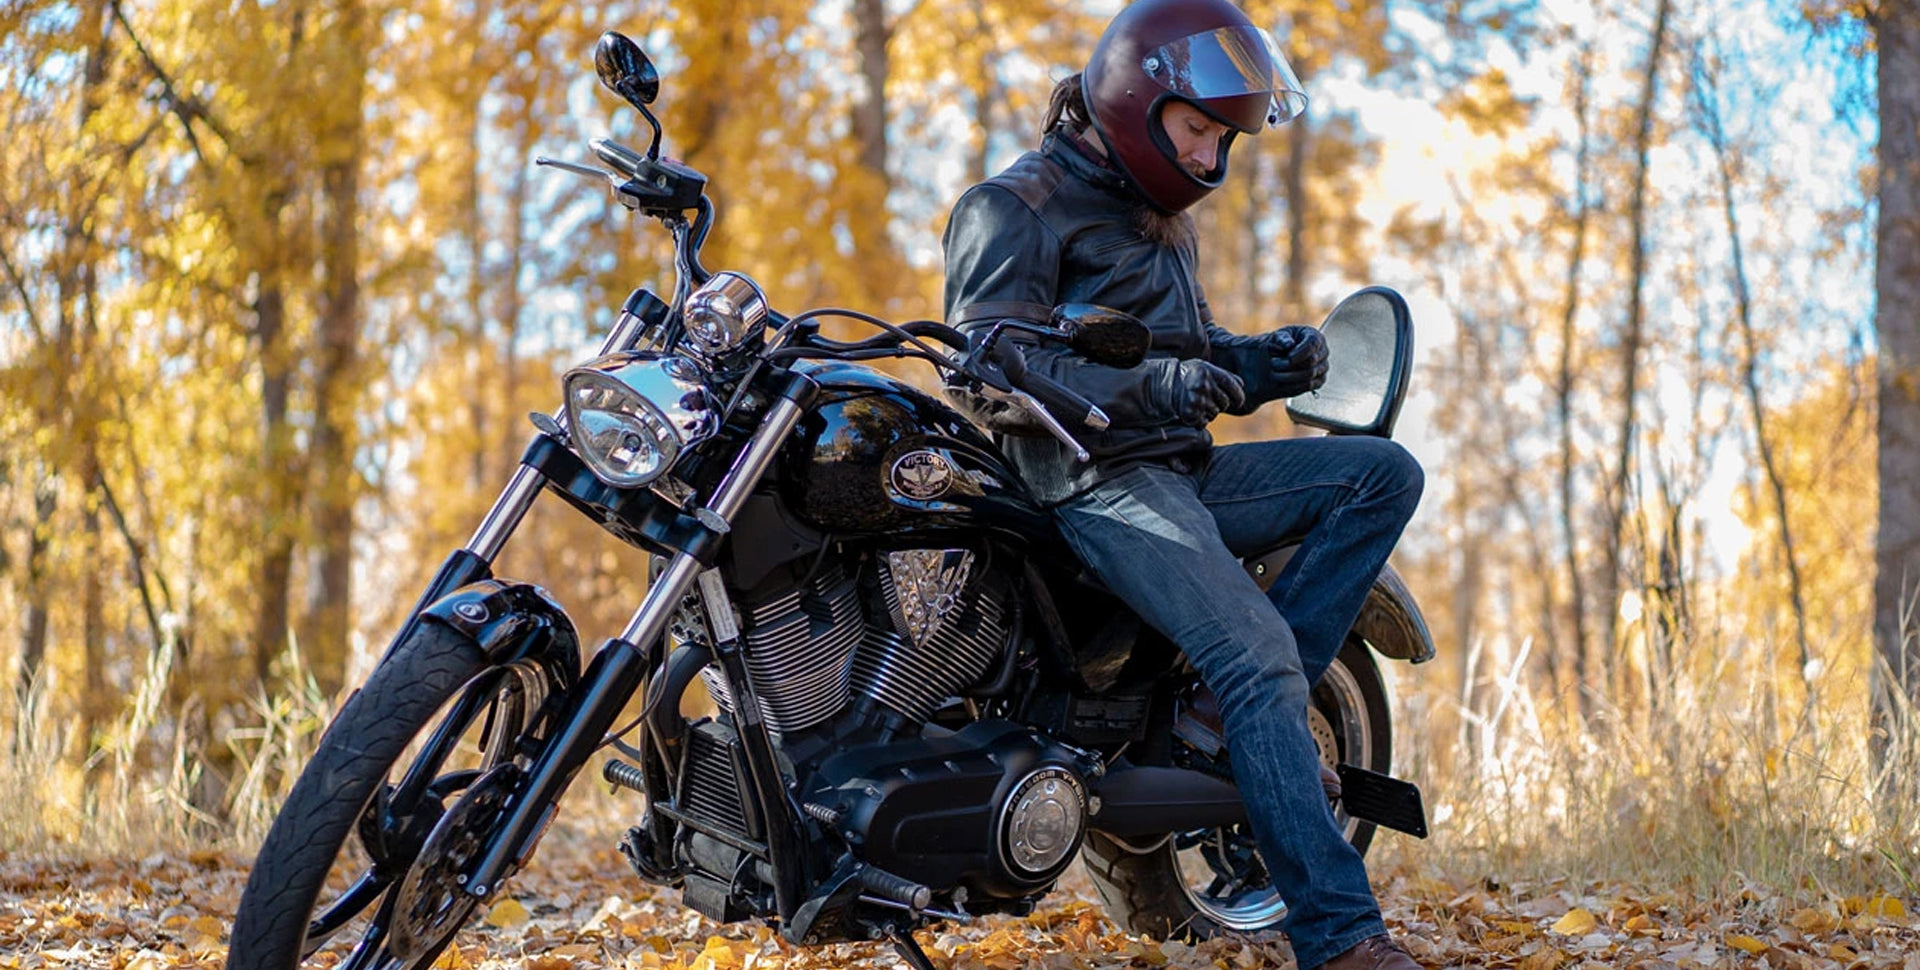 Motorcycle Safety Gear - Lightweight armored jackets & riding